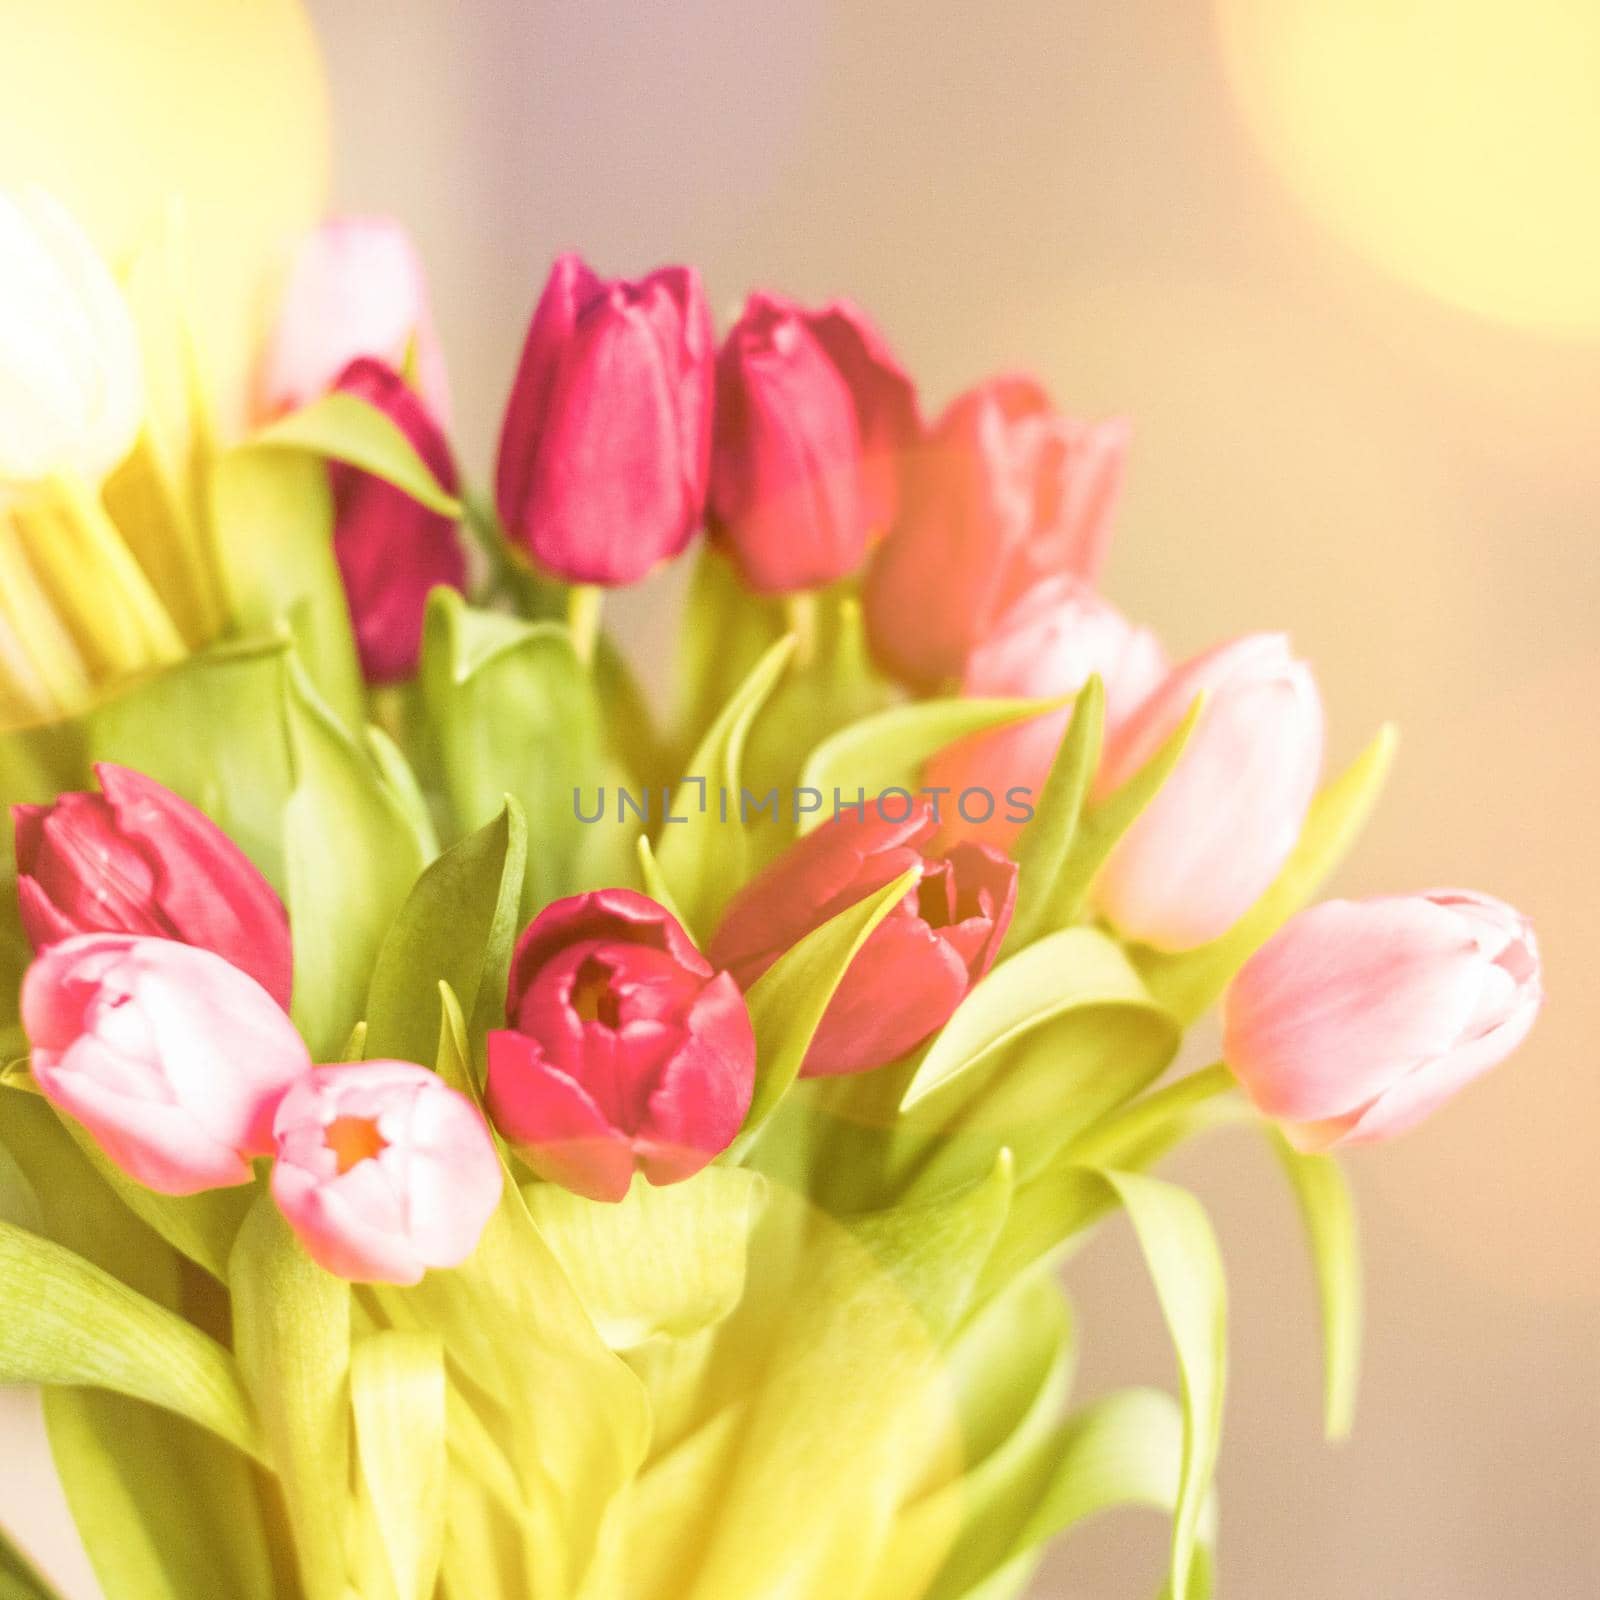 tulips in sunlight - floral, spring holidays and birthday gift concept by Anneleven